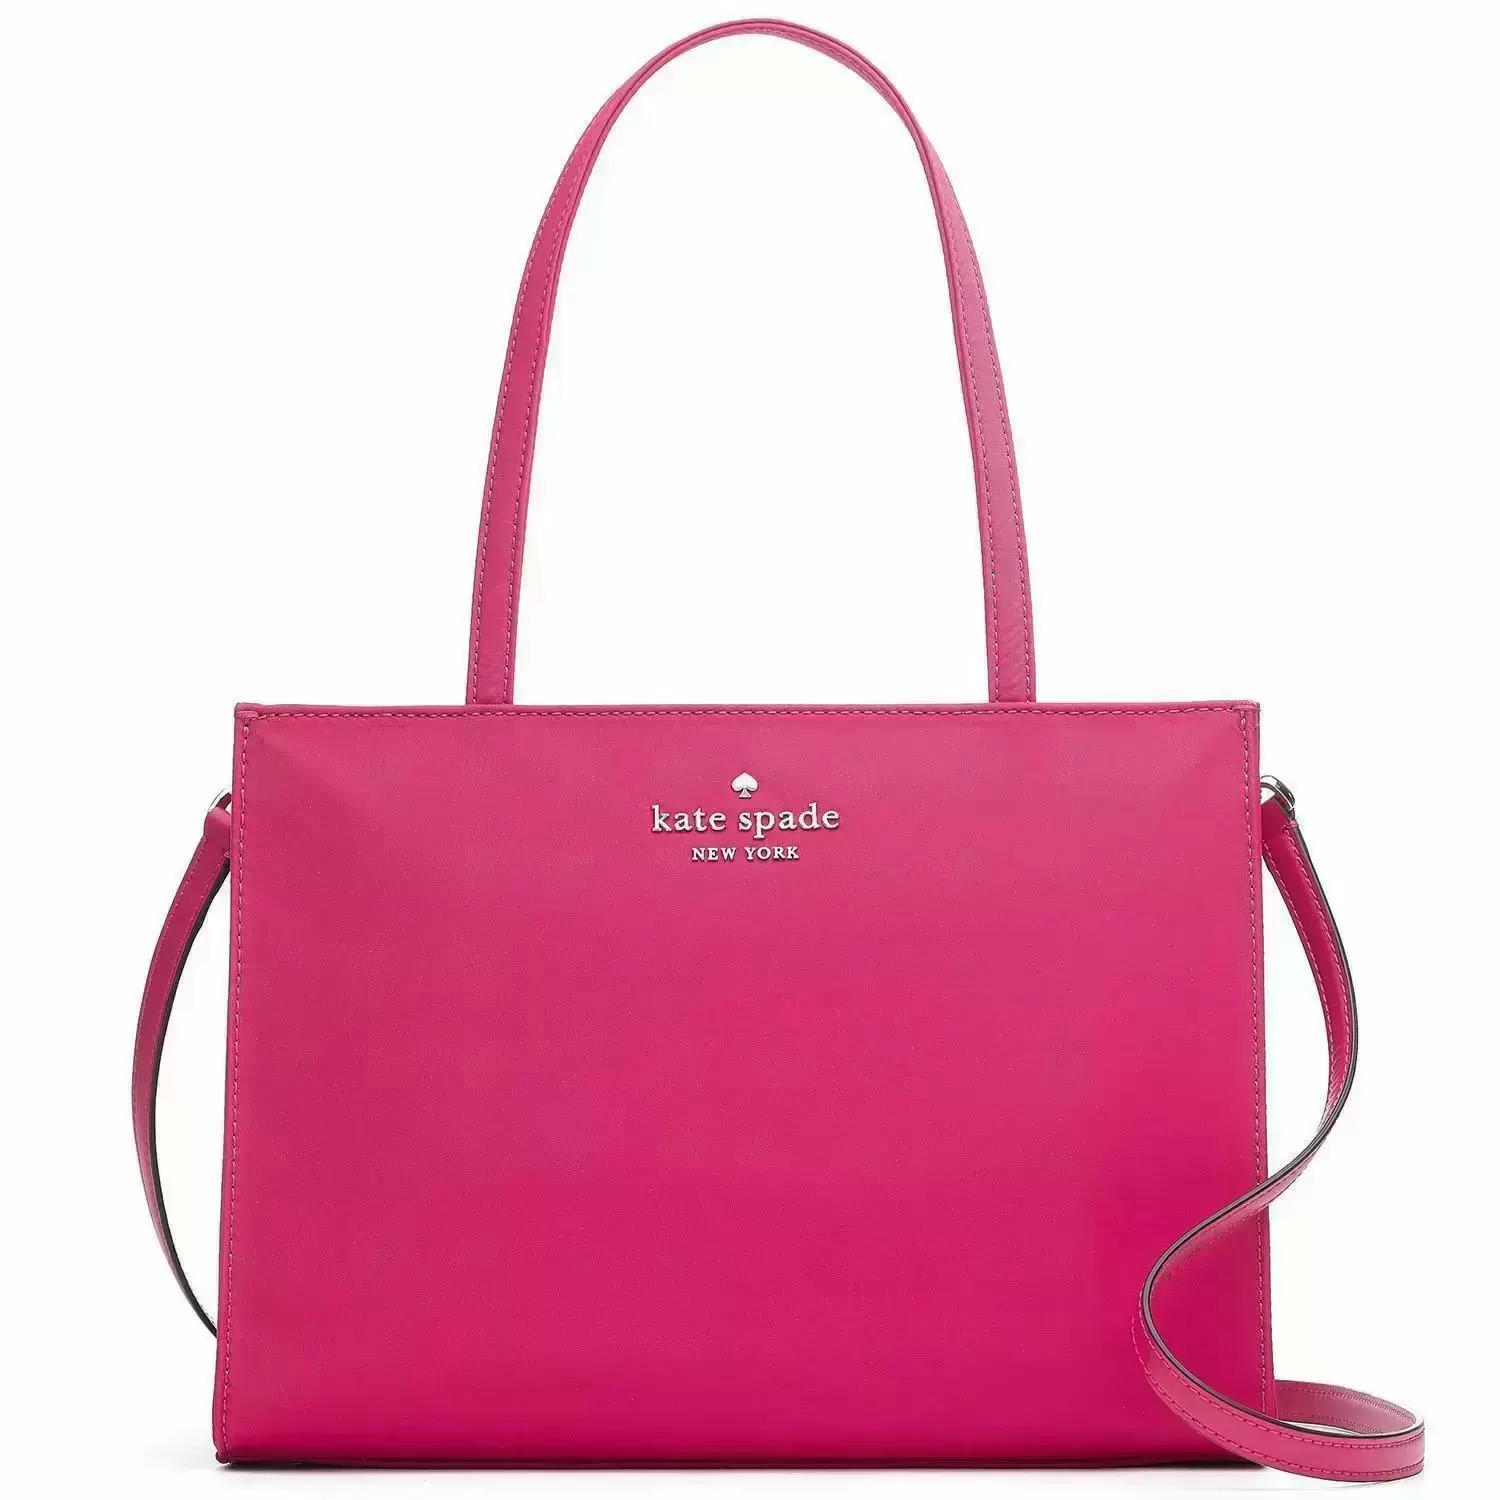 Kate Spade Sale with Extra 30% Off Coupon